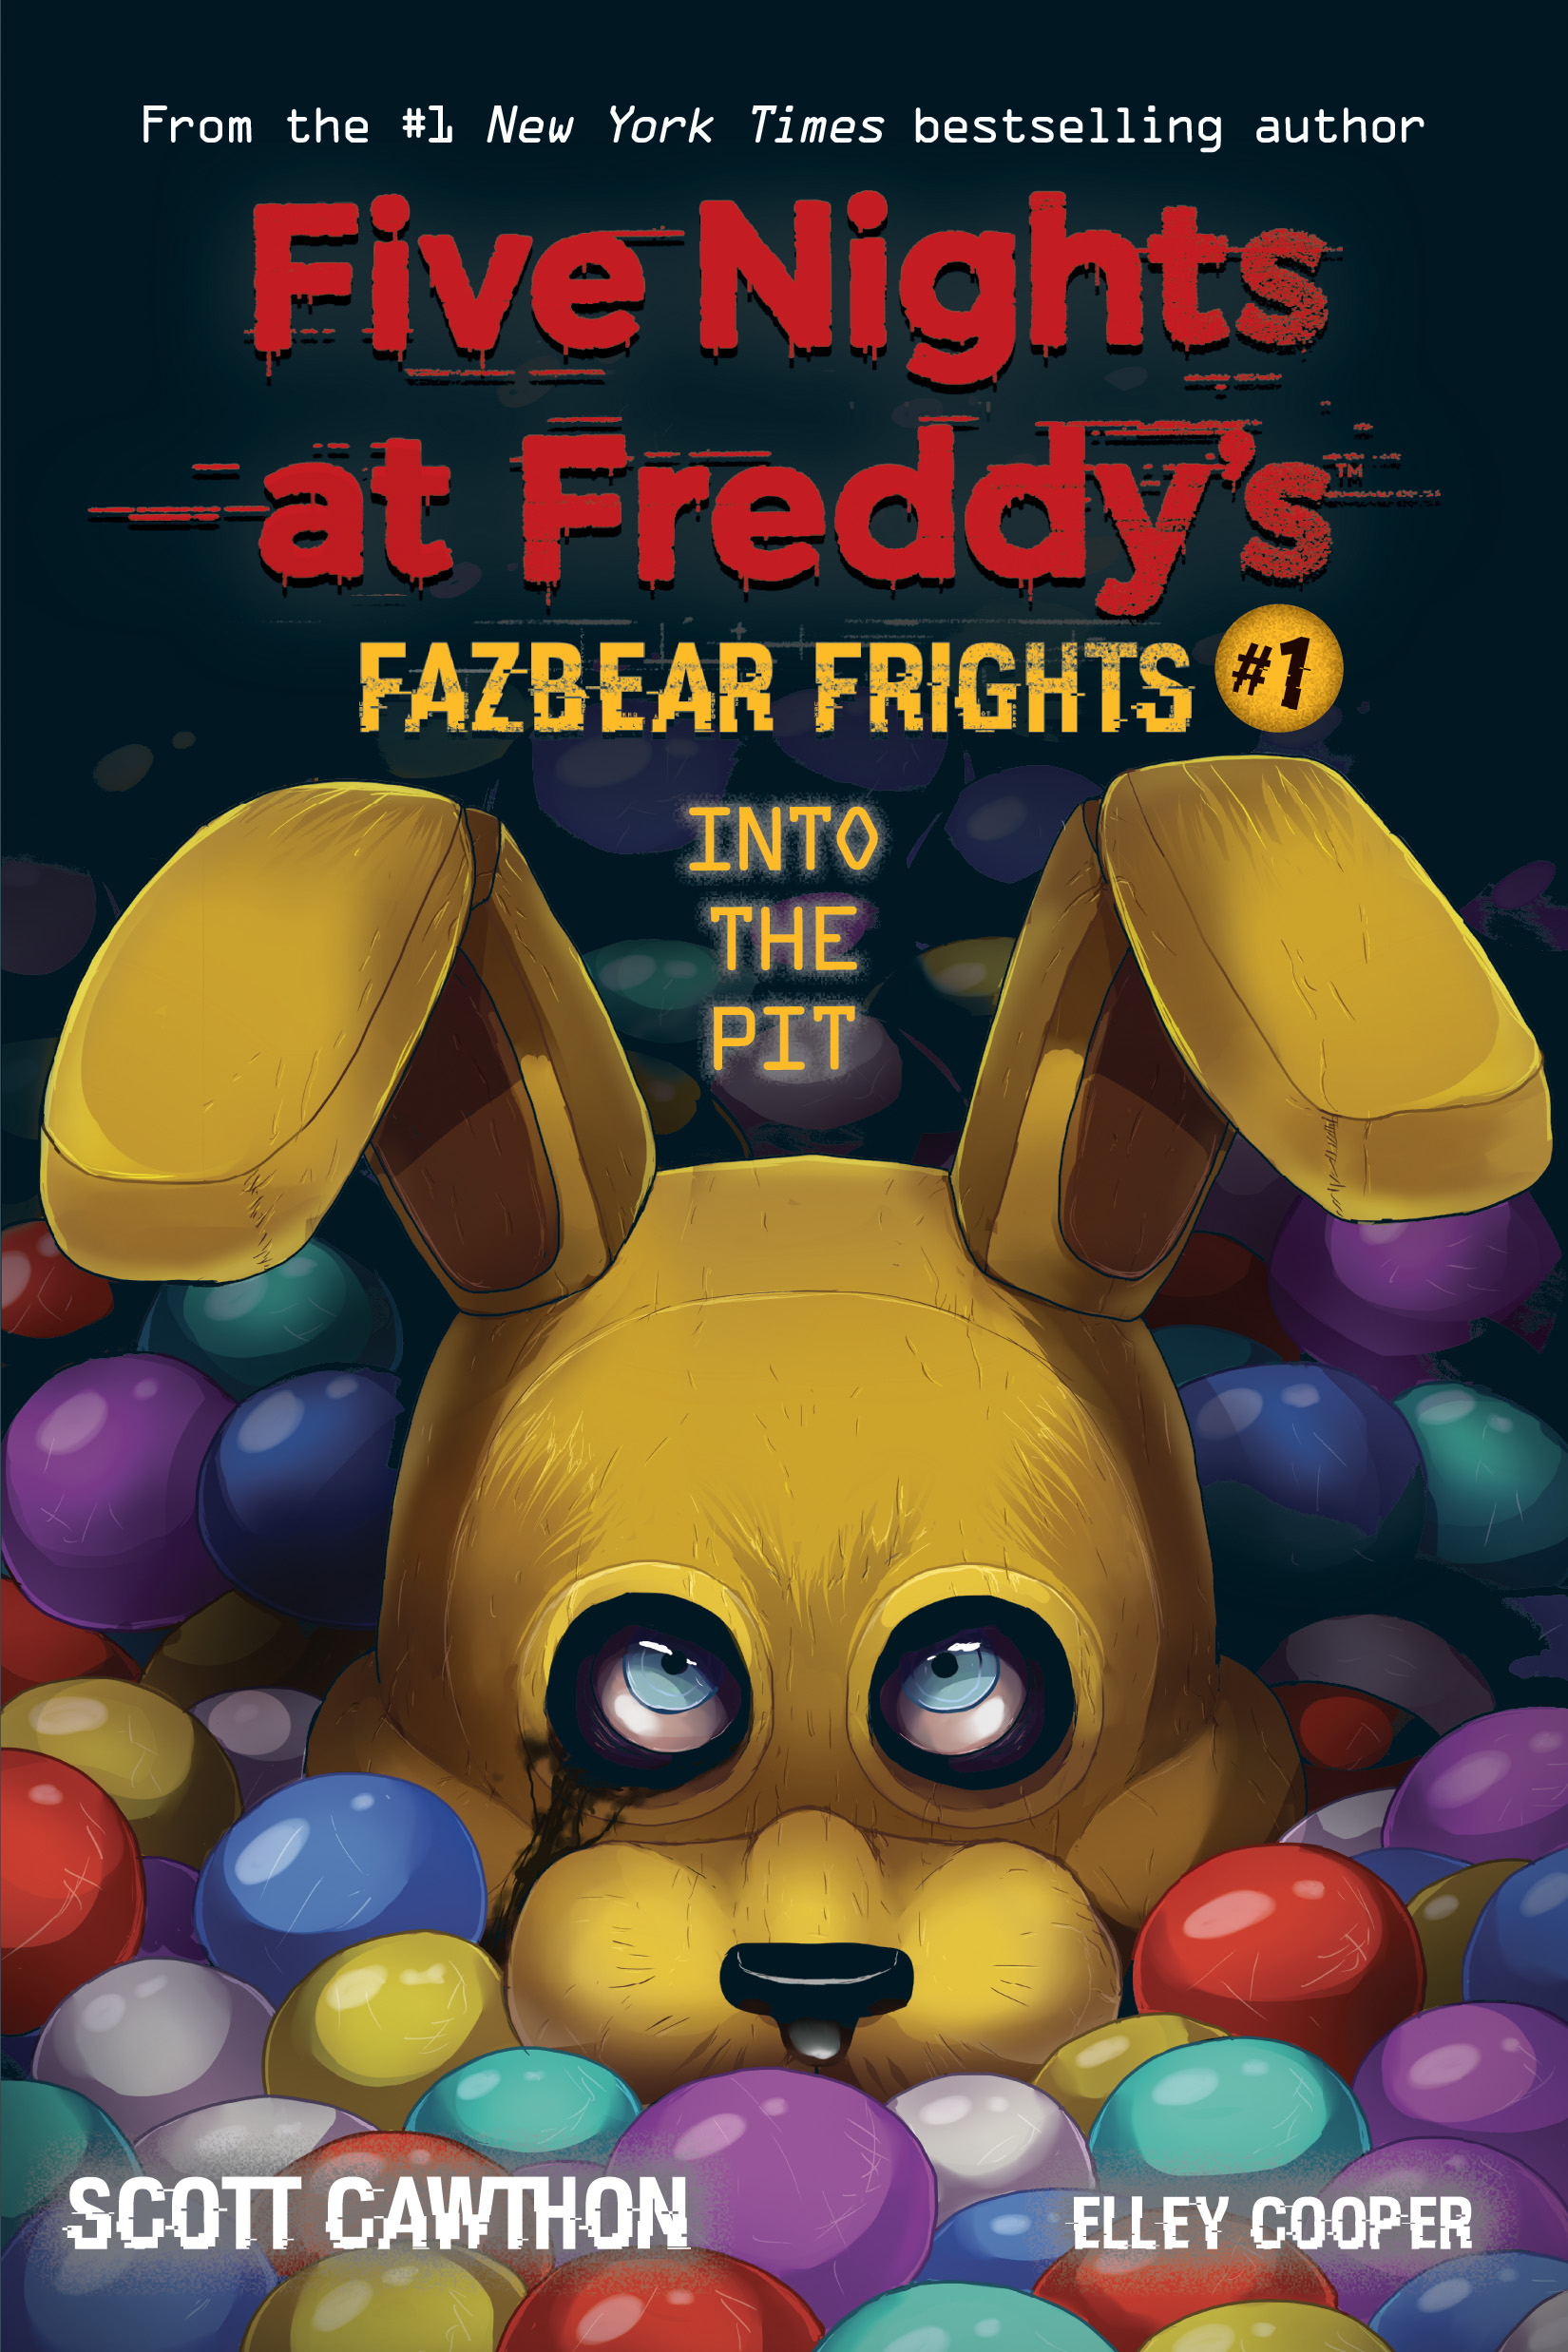 Five Nights at Freddys Twisted Ones: Read Excerpt